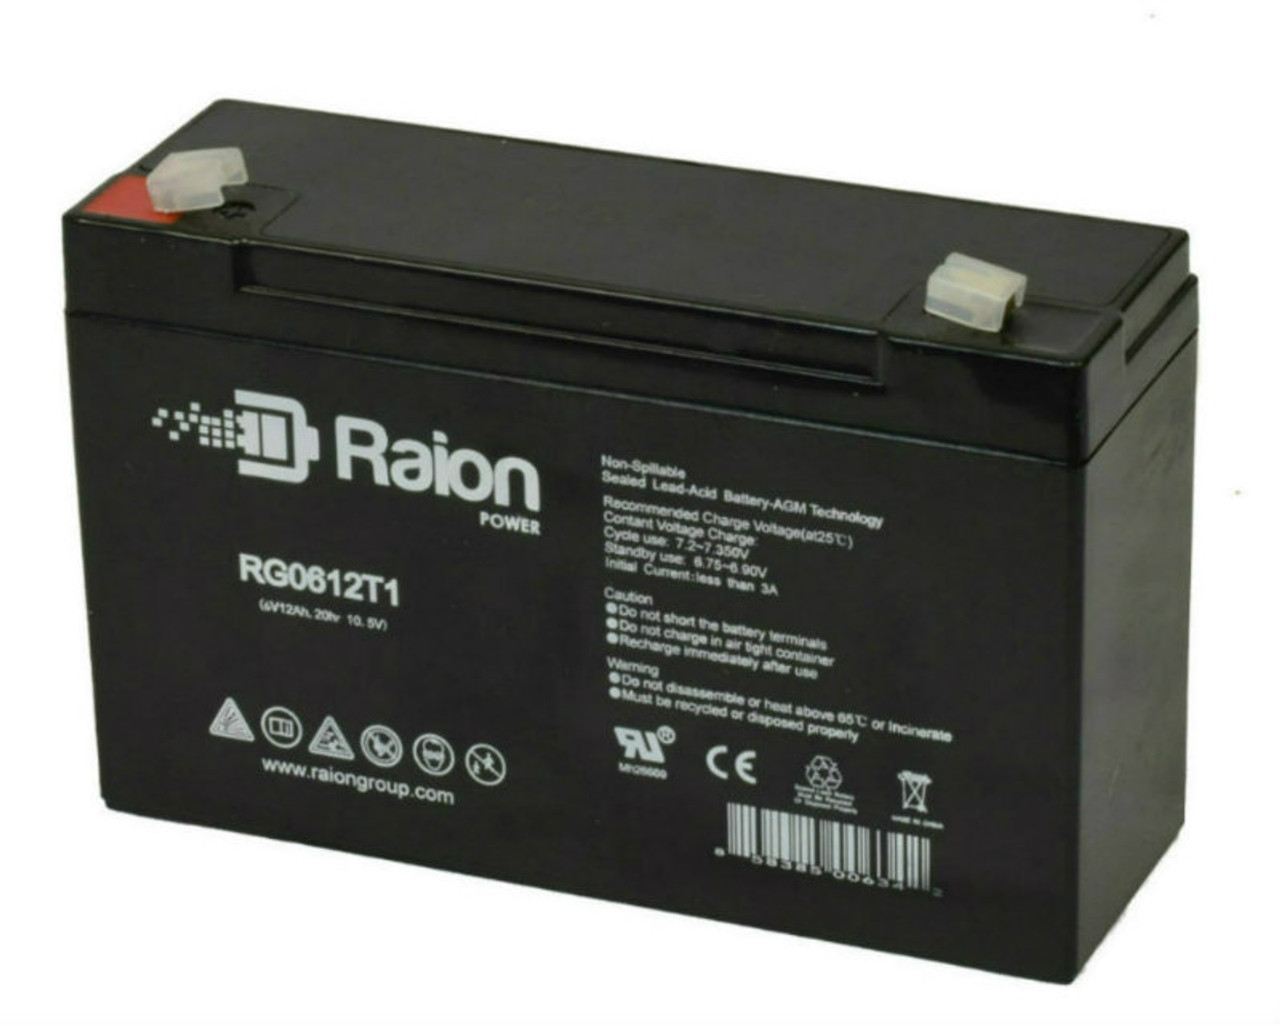 Raion Power RG06120T1 6V 12Ah Replacement UPS Battery Cartridge for Minuteman A 900/2